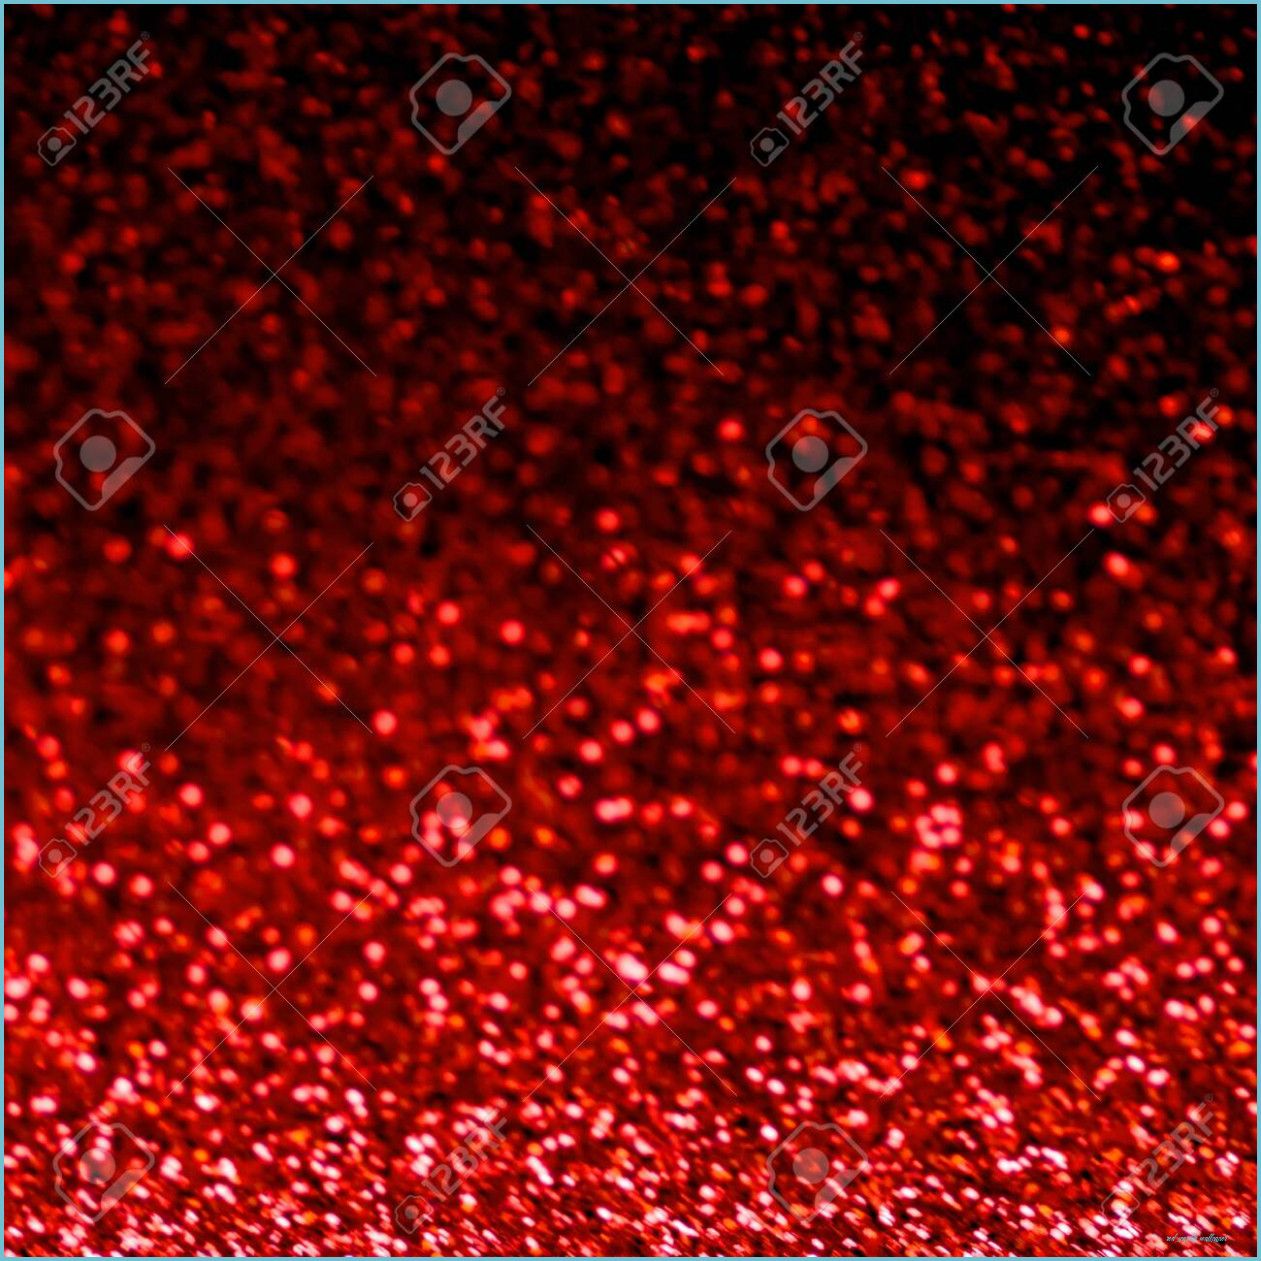 Red Sparkle Wallpaper for Valentines Day and Christmas. Dark